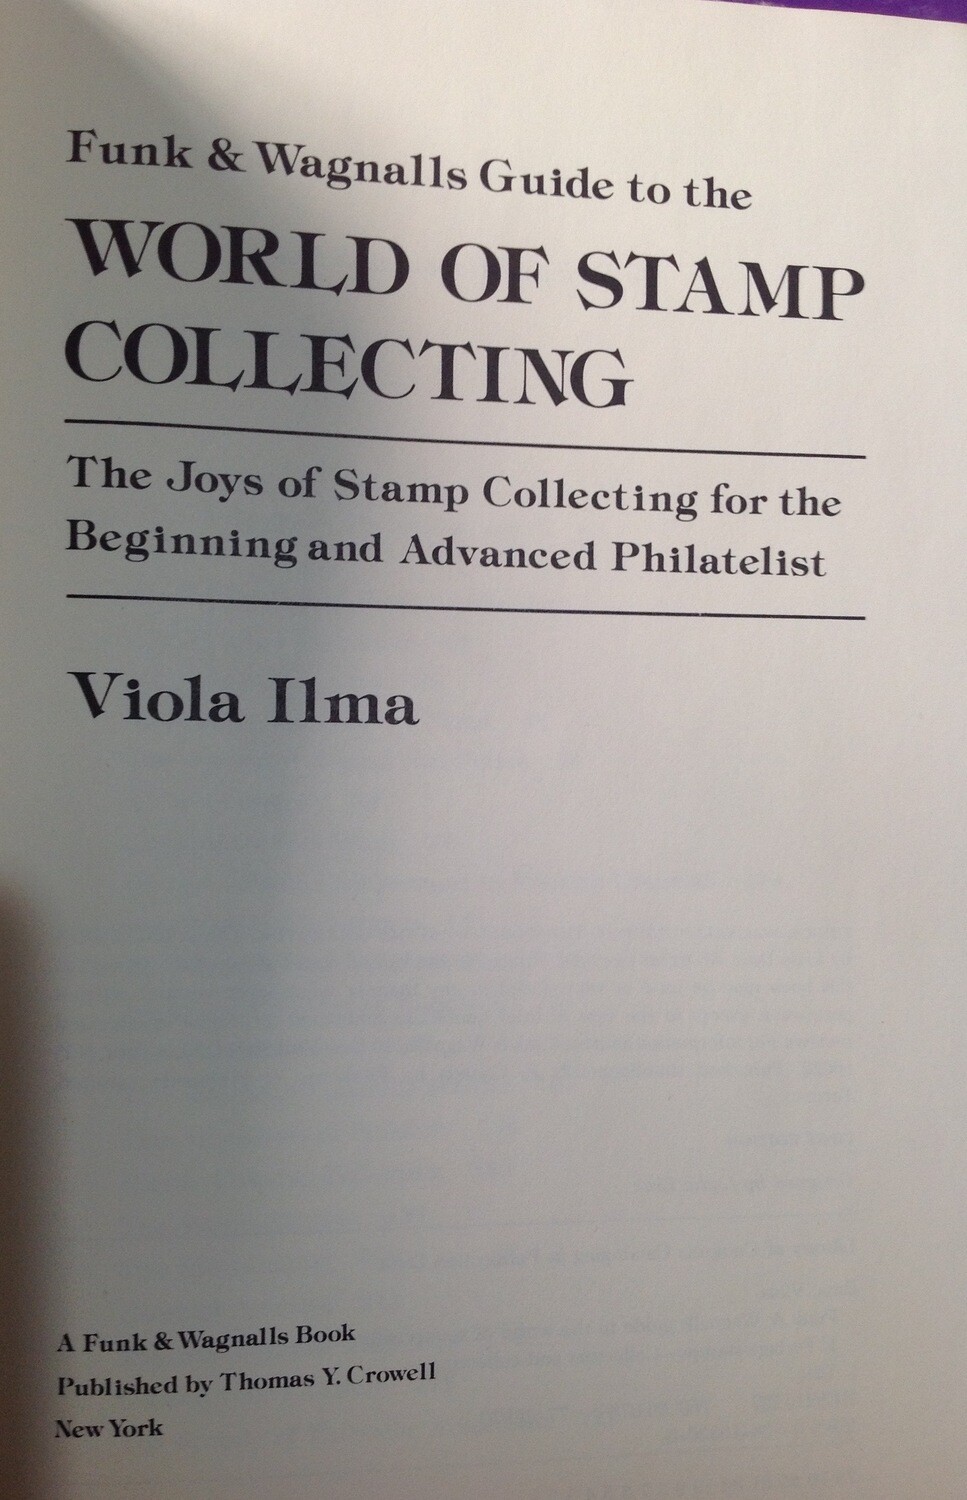 Funk and Wagnalls Guide to the World of Stamp Collecting